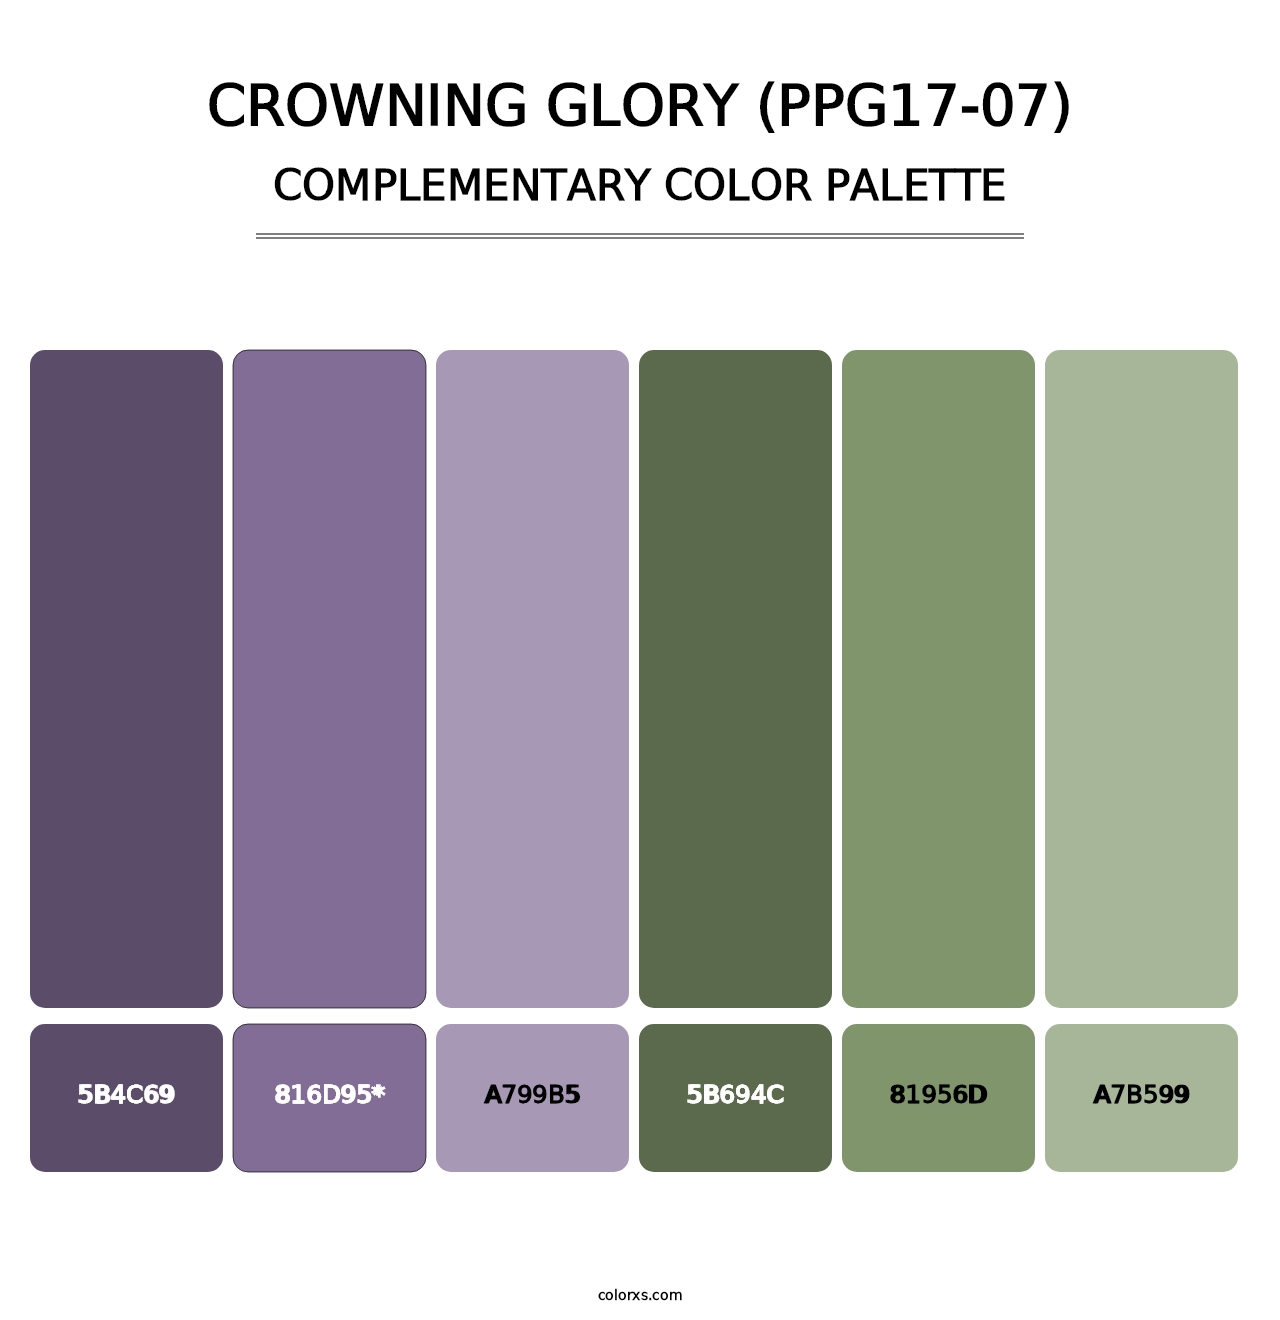 Crowning Glory (PPG17-07) - Complementary Color Palette